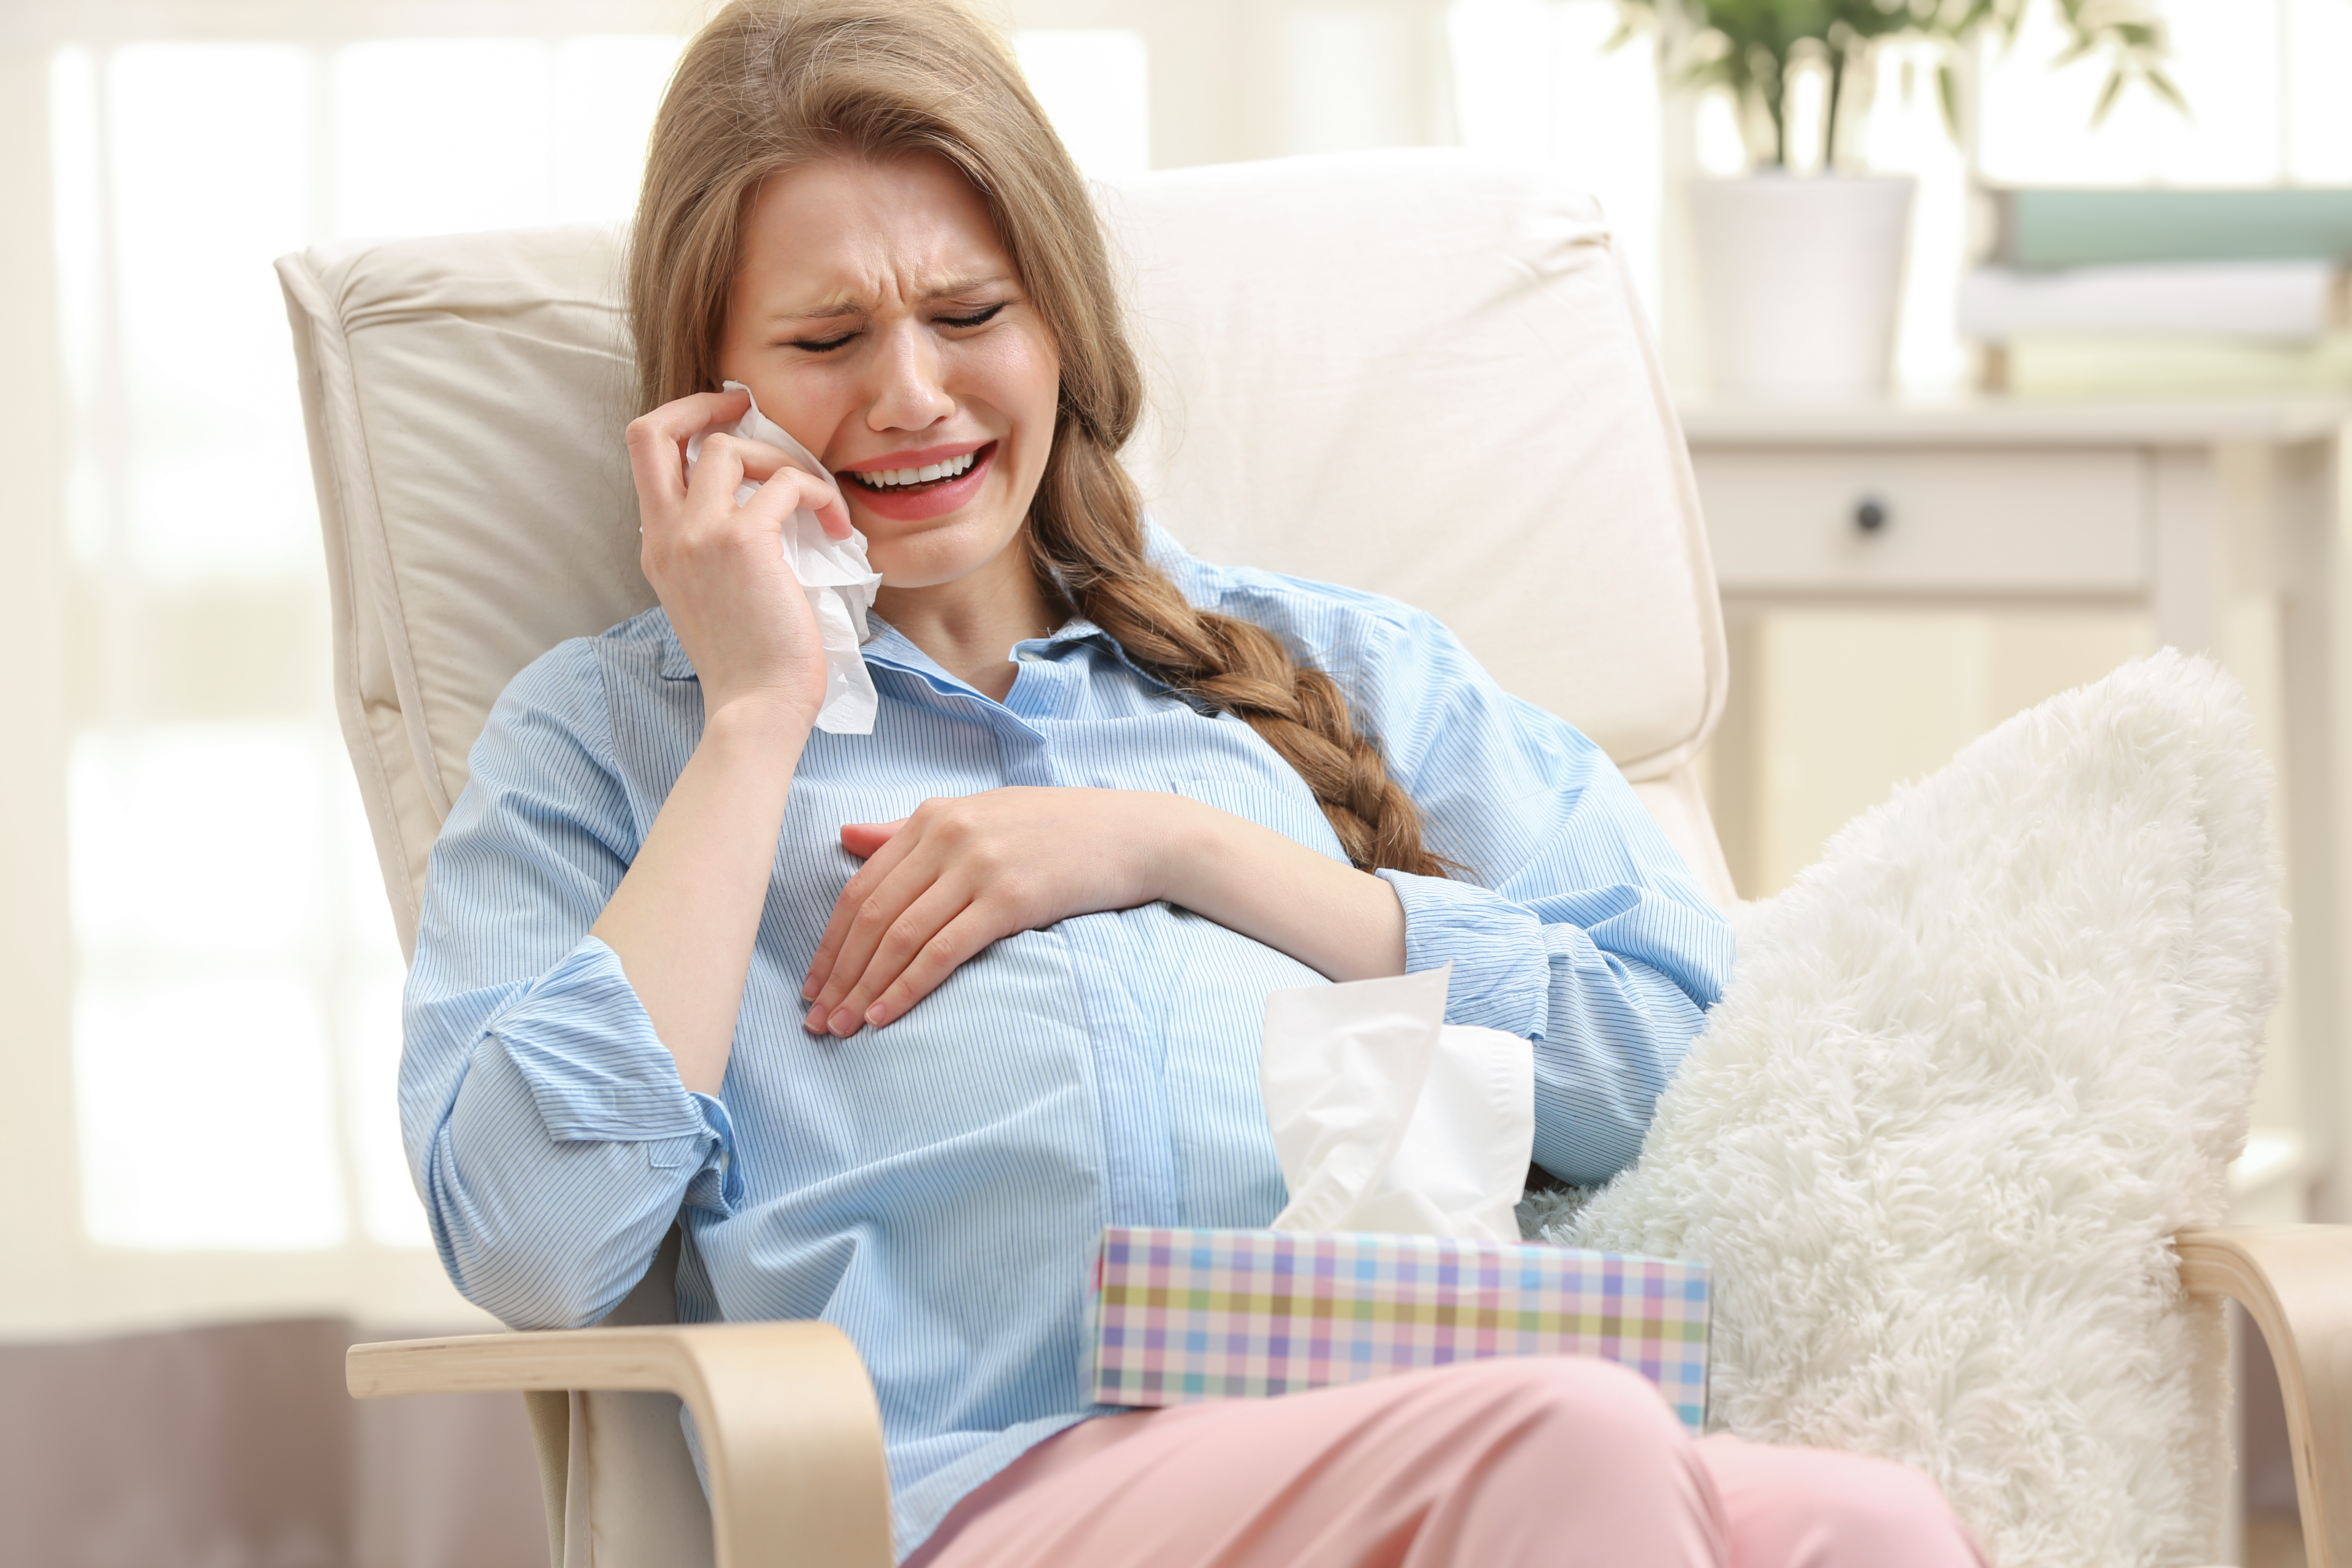 Pregnant woman crying | Source: Shutterstock